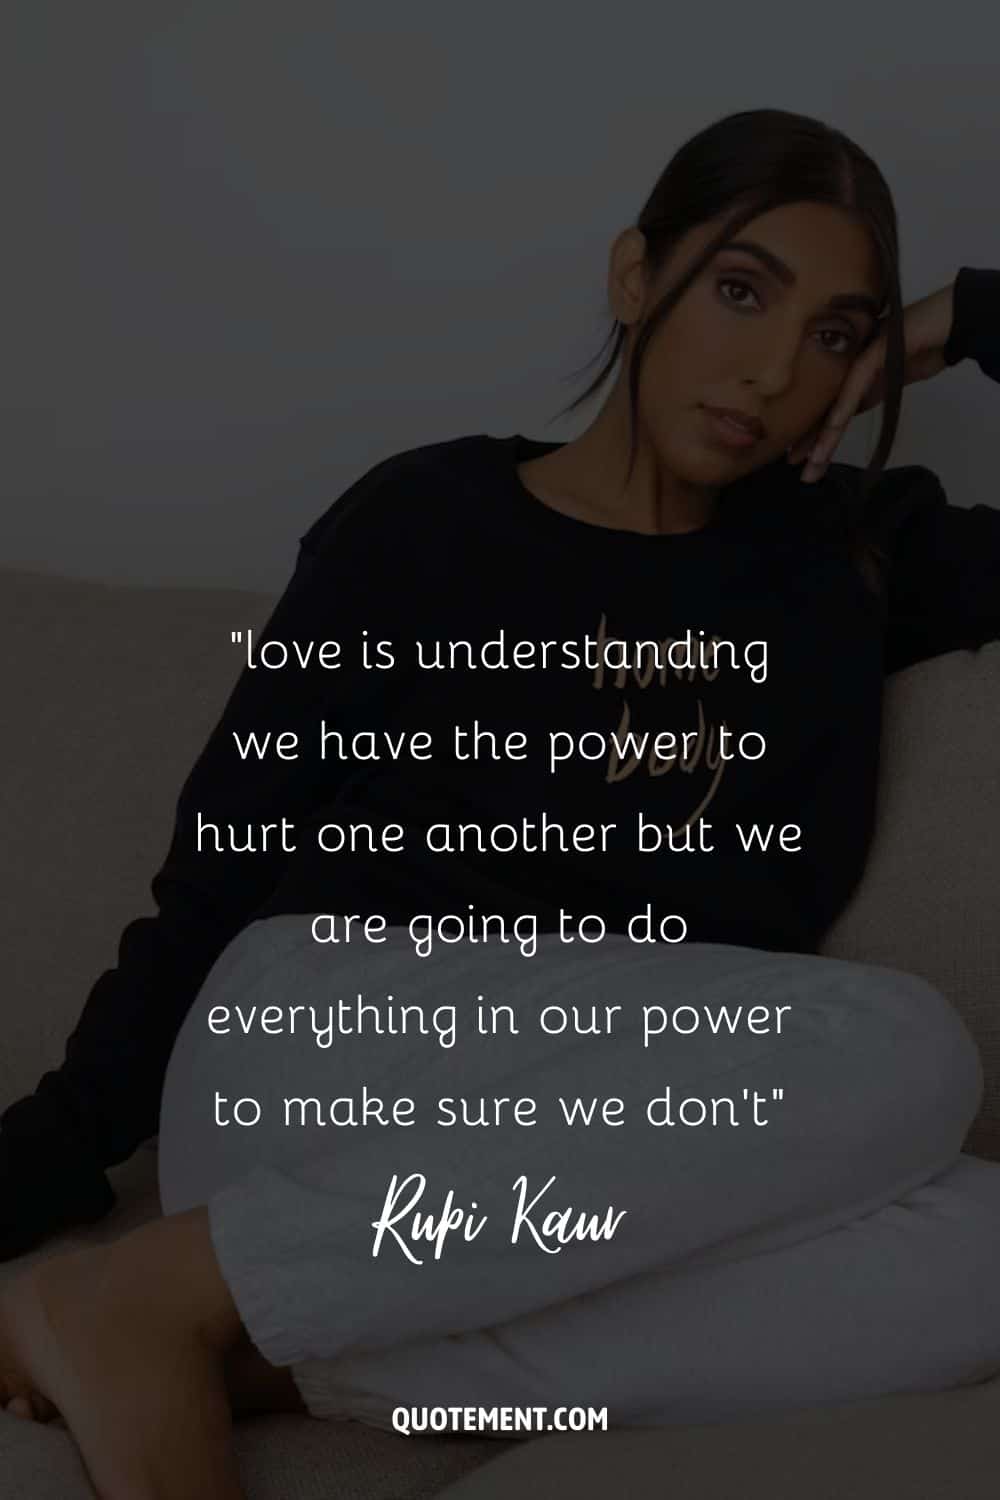 love is understanding we have the power to hurt one another but we are going to do everything in our power to make sure we don't